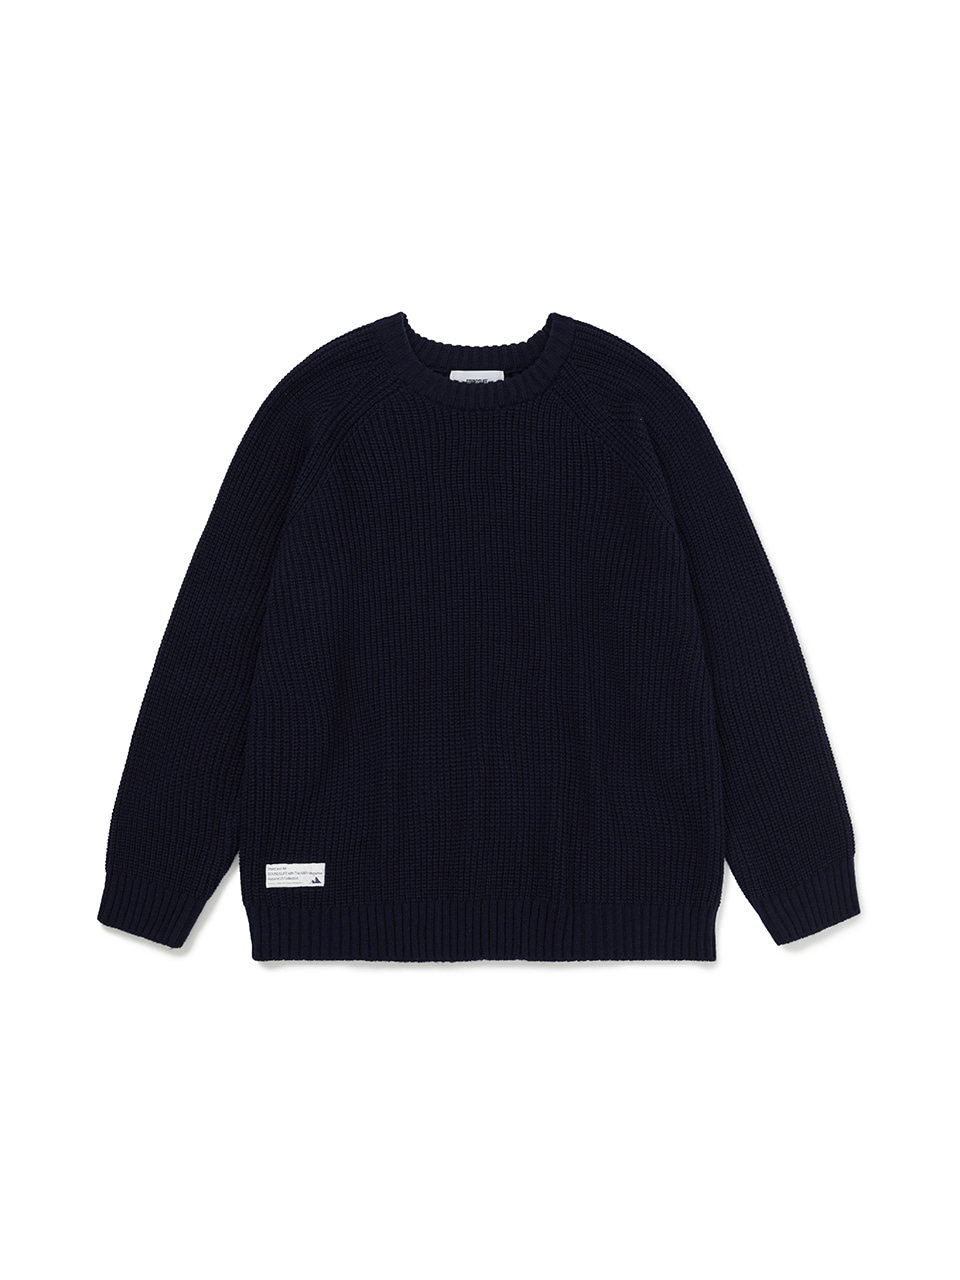 SOUNDSLIFE - SL X TNM Field and Air Knit Sweater Navy